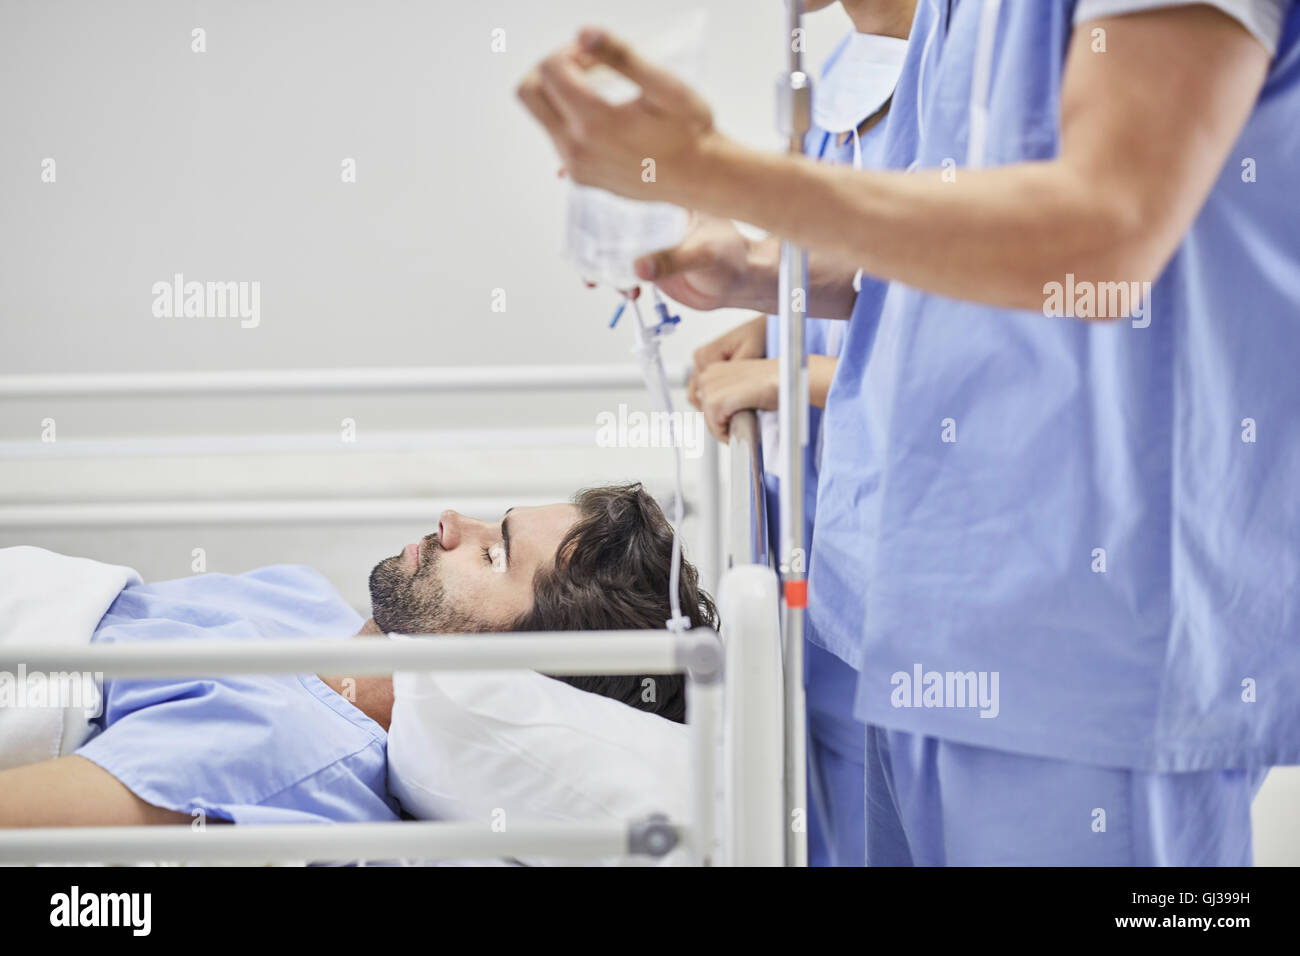 Doctor providing medical treatment to patient on hospital bed Stock Photo